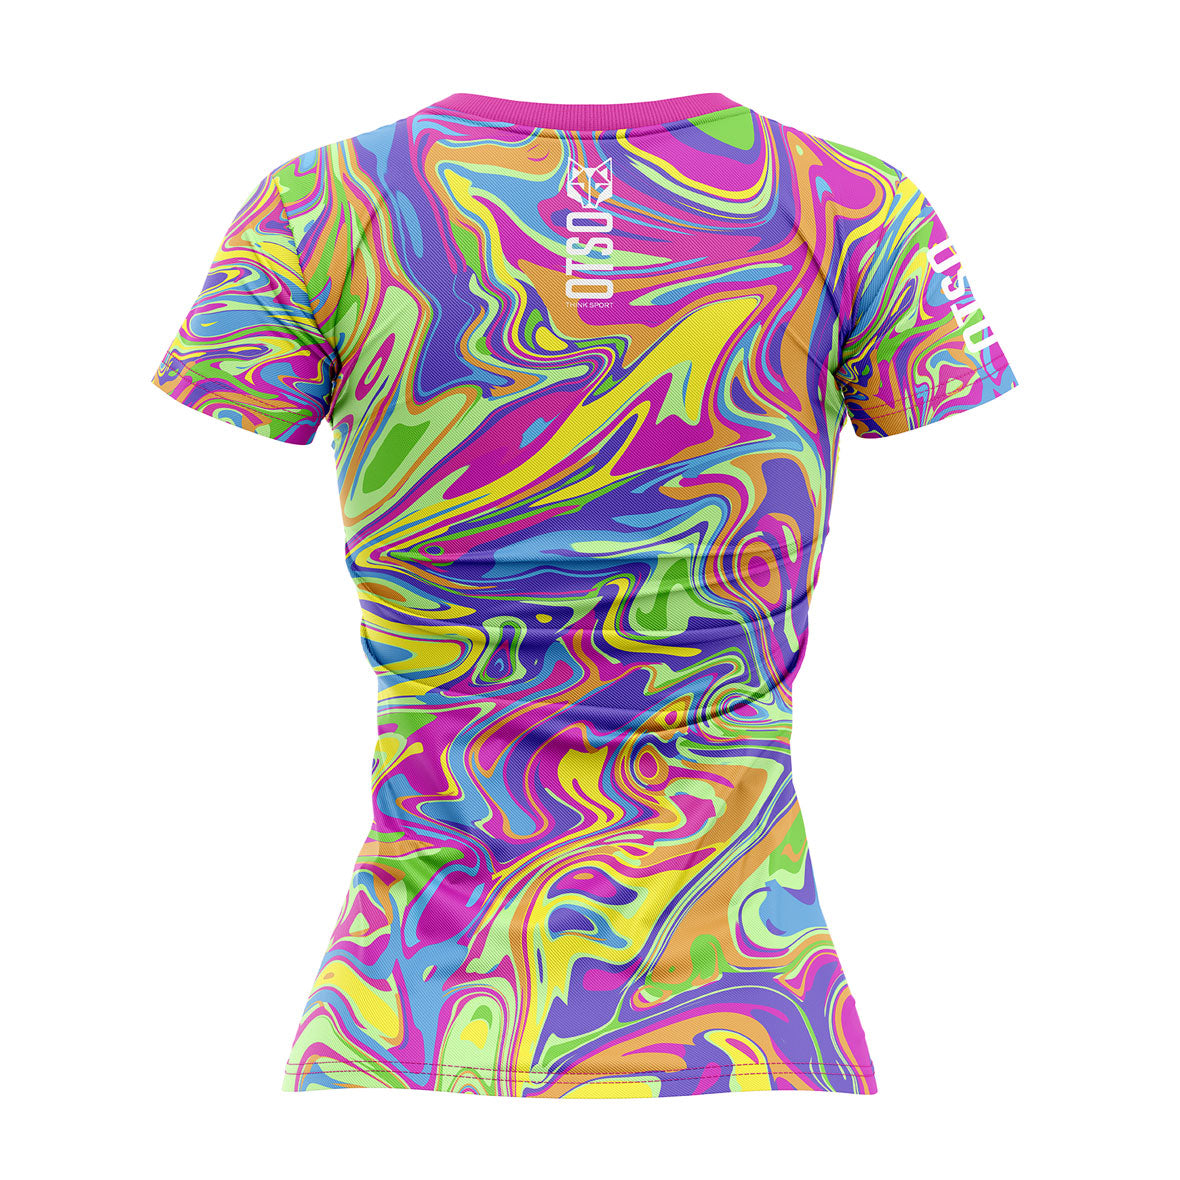 T-shirt manches courtes femme - Psychedelic